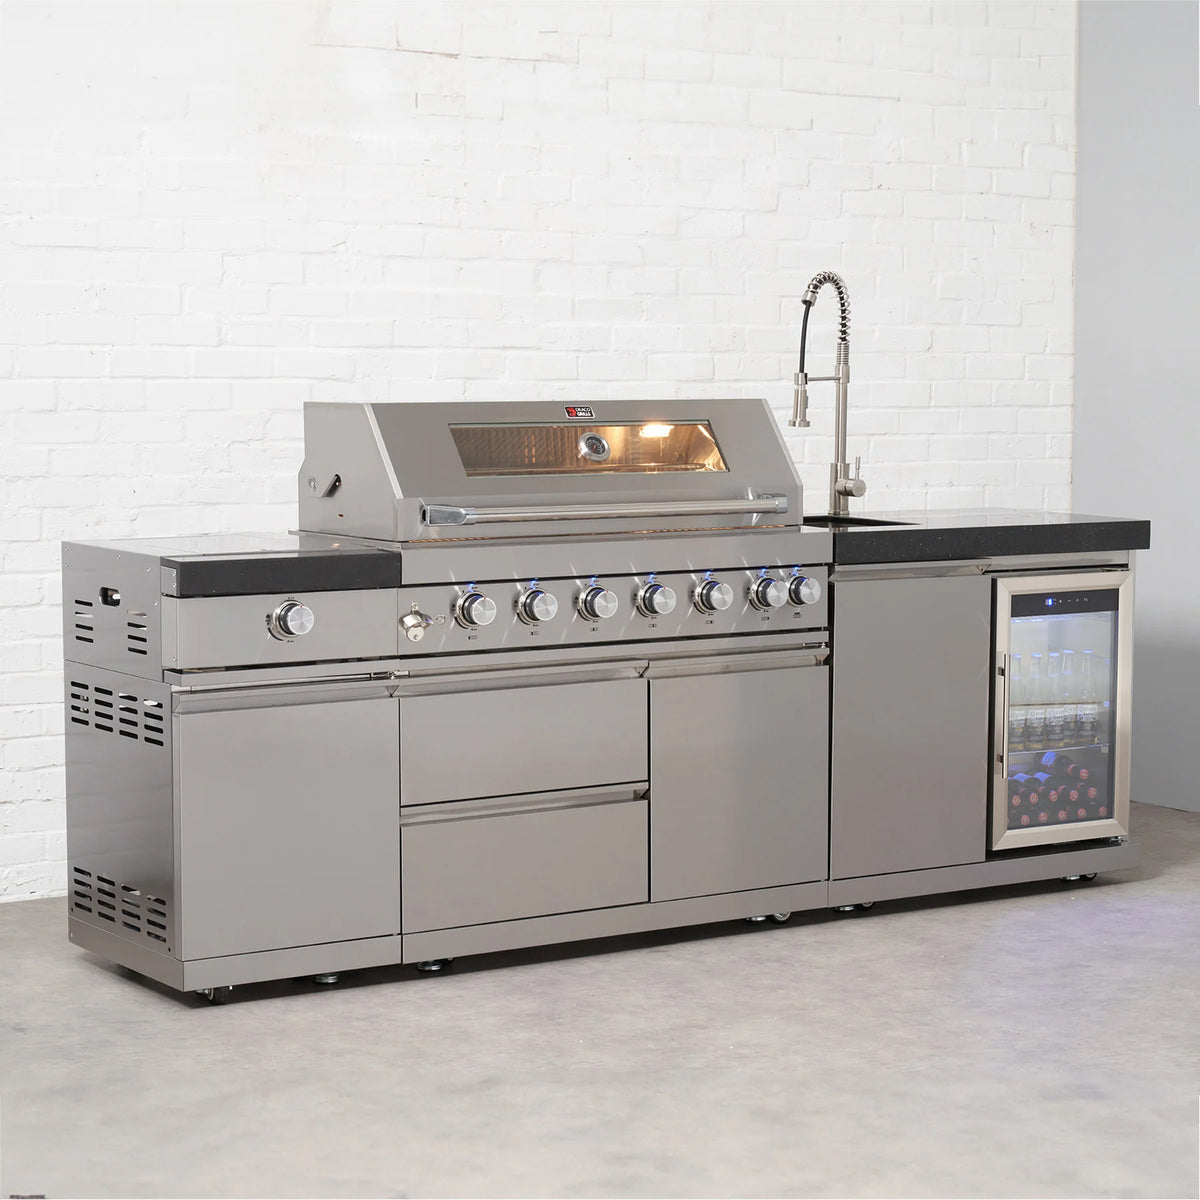 Draco Grills 6 Burner BBQ Modular Outdoor Kitchen with Sear Station, Sink and Fridge Unit